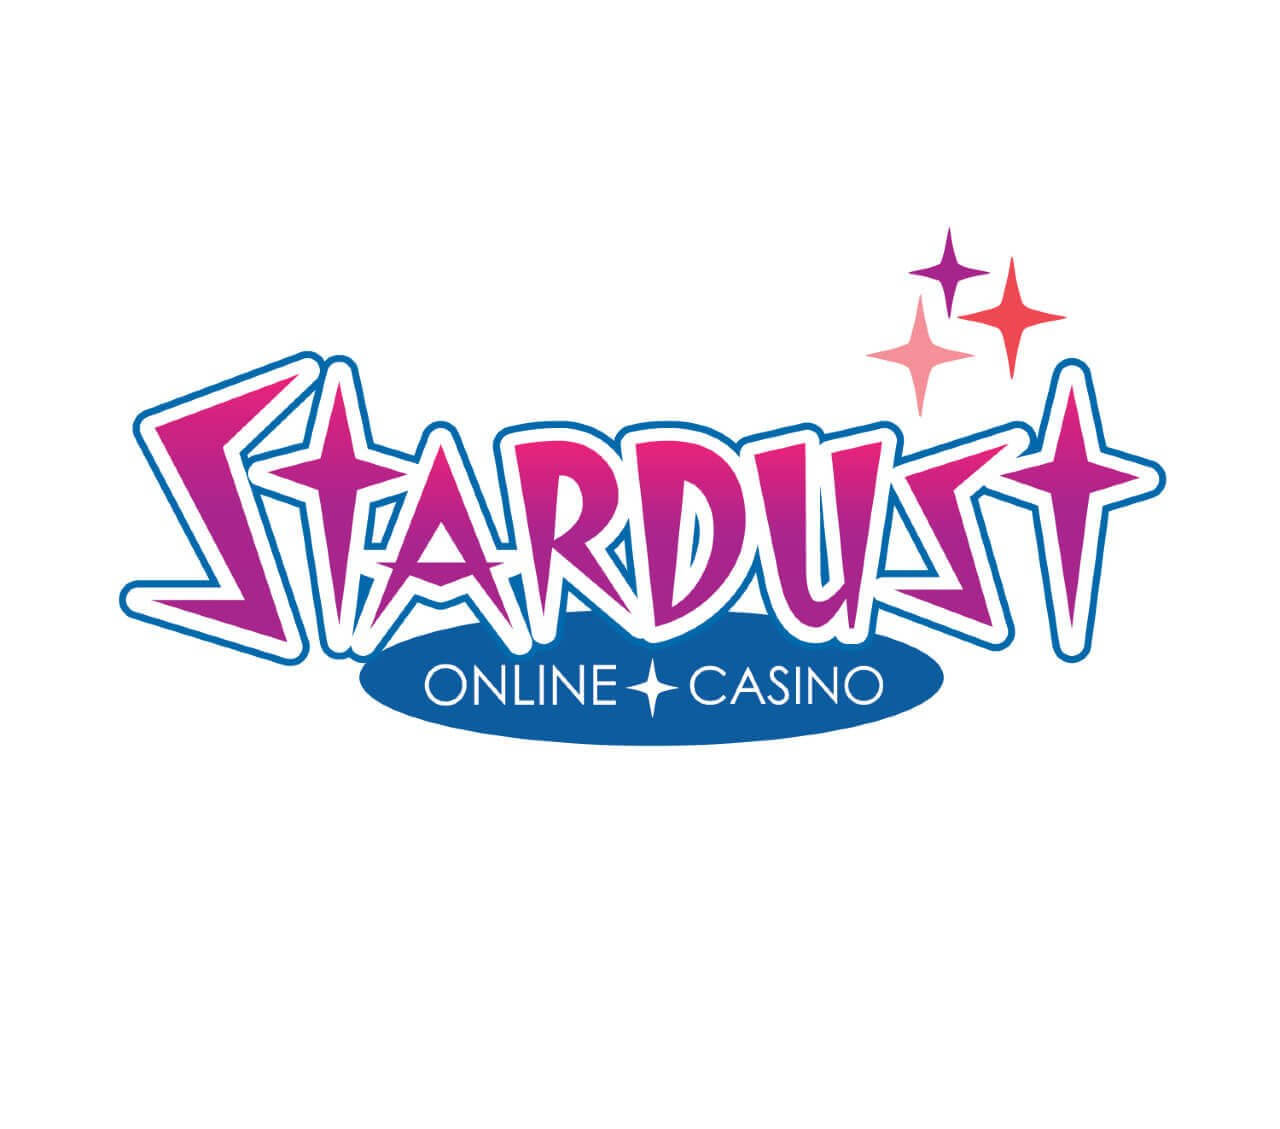 Stardust Promo Code Sign up with the New Online Casino